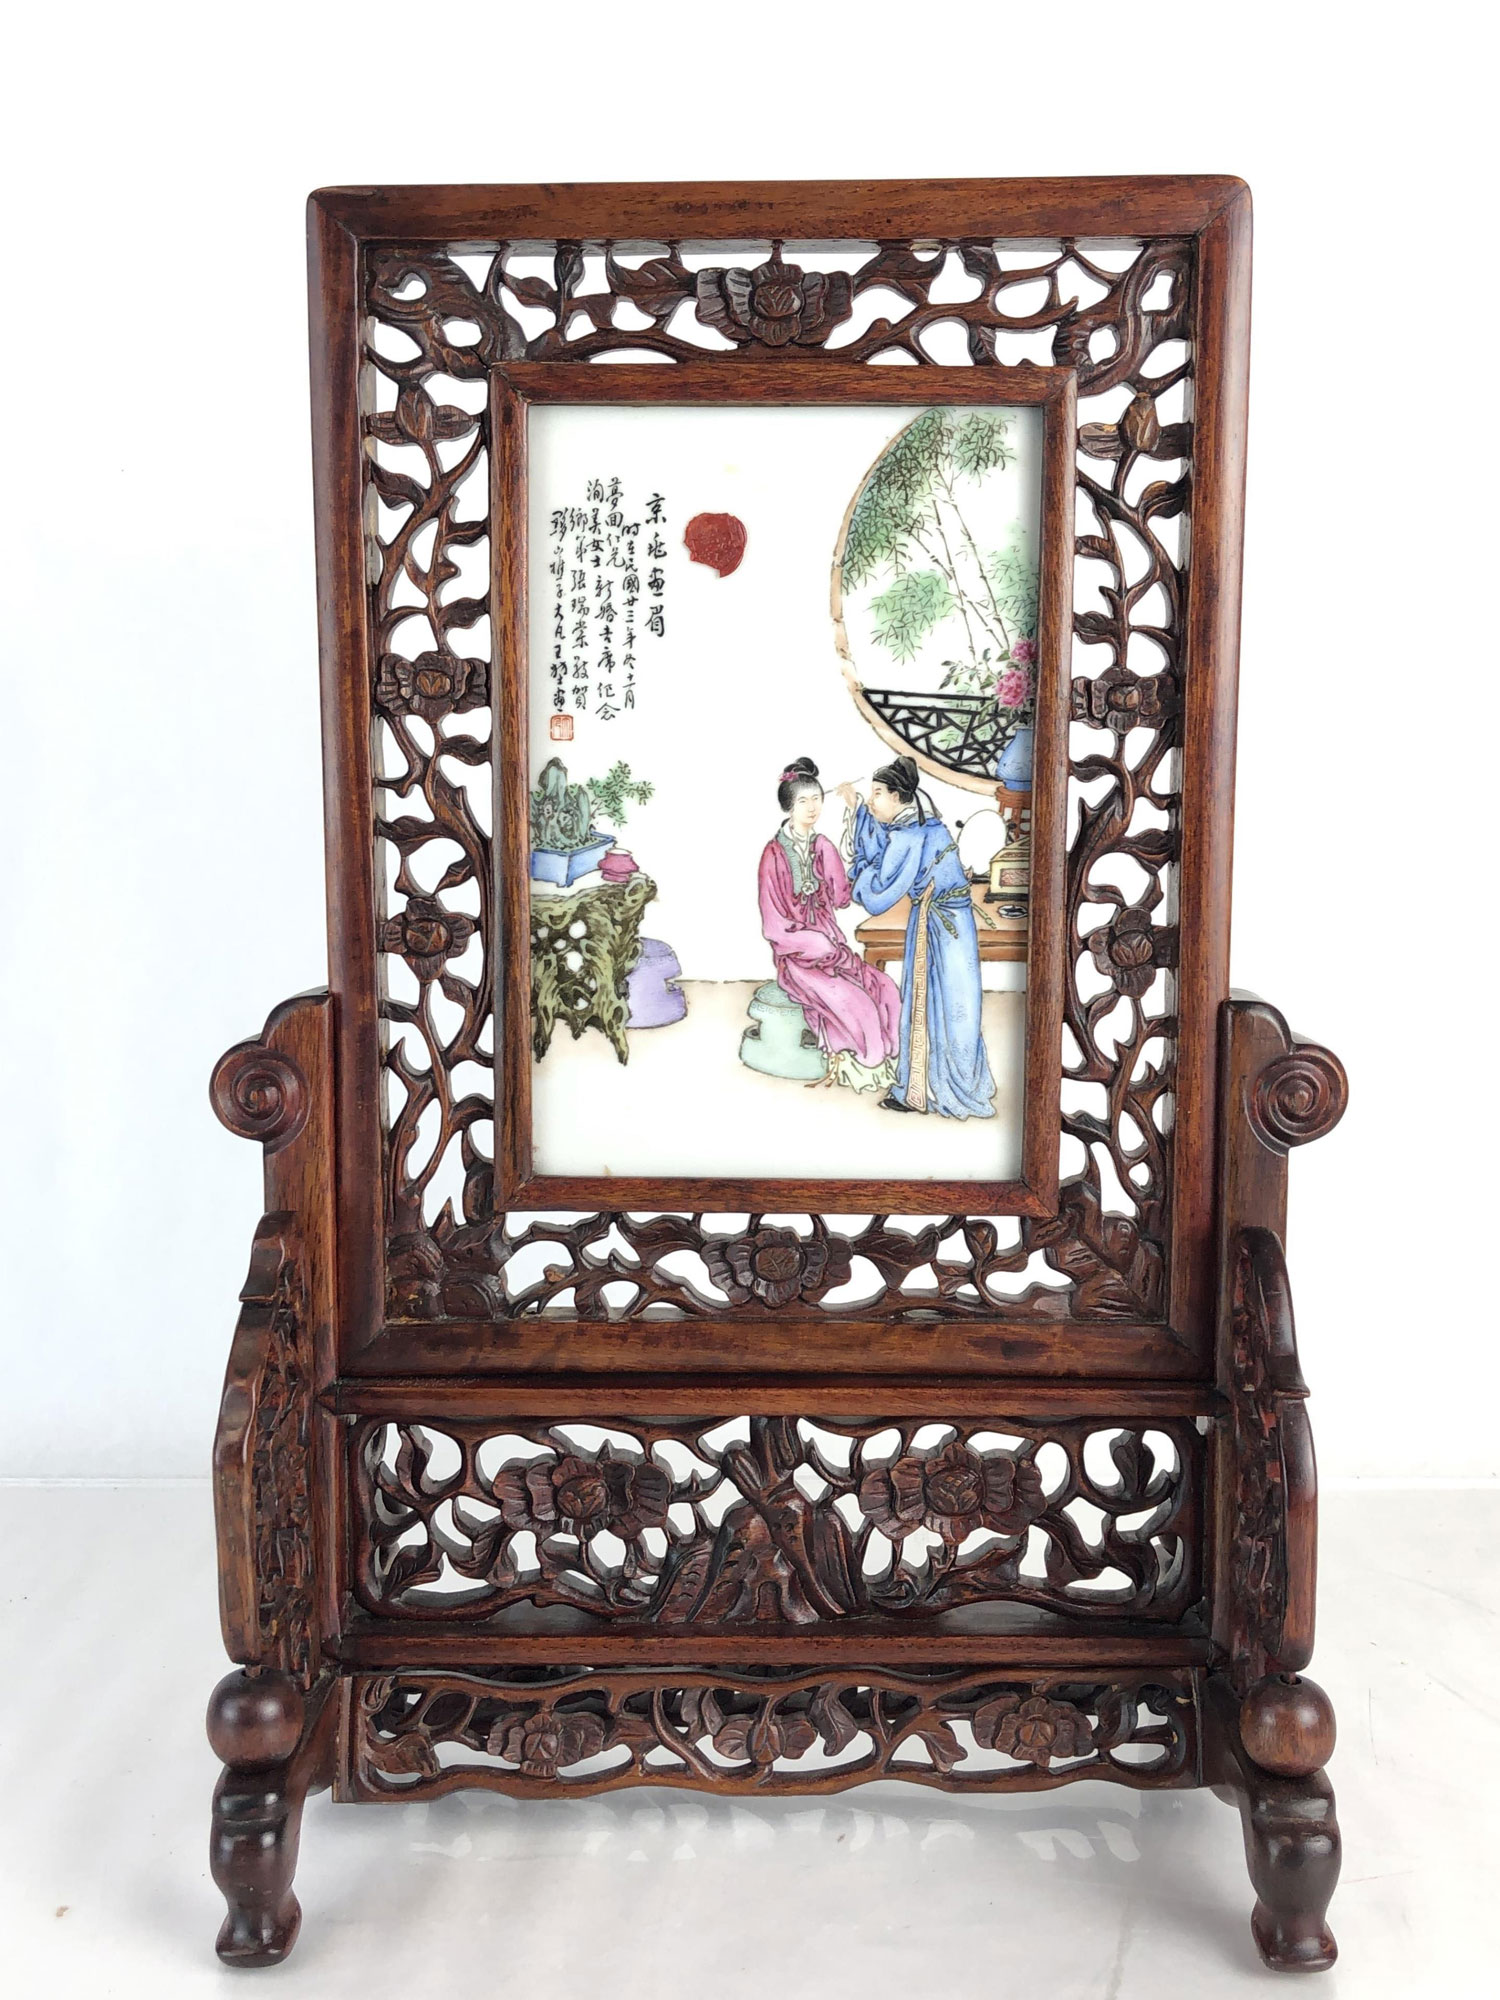 Antique-Chinese-table-screen.jpg